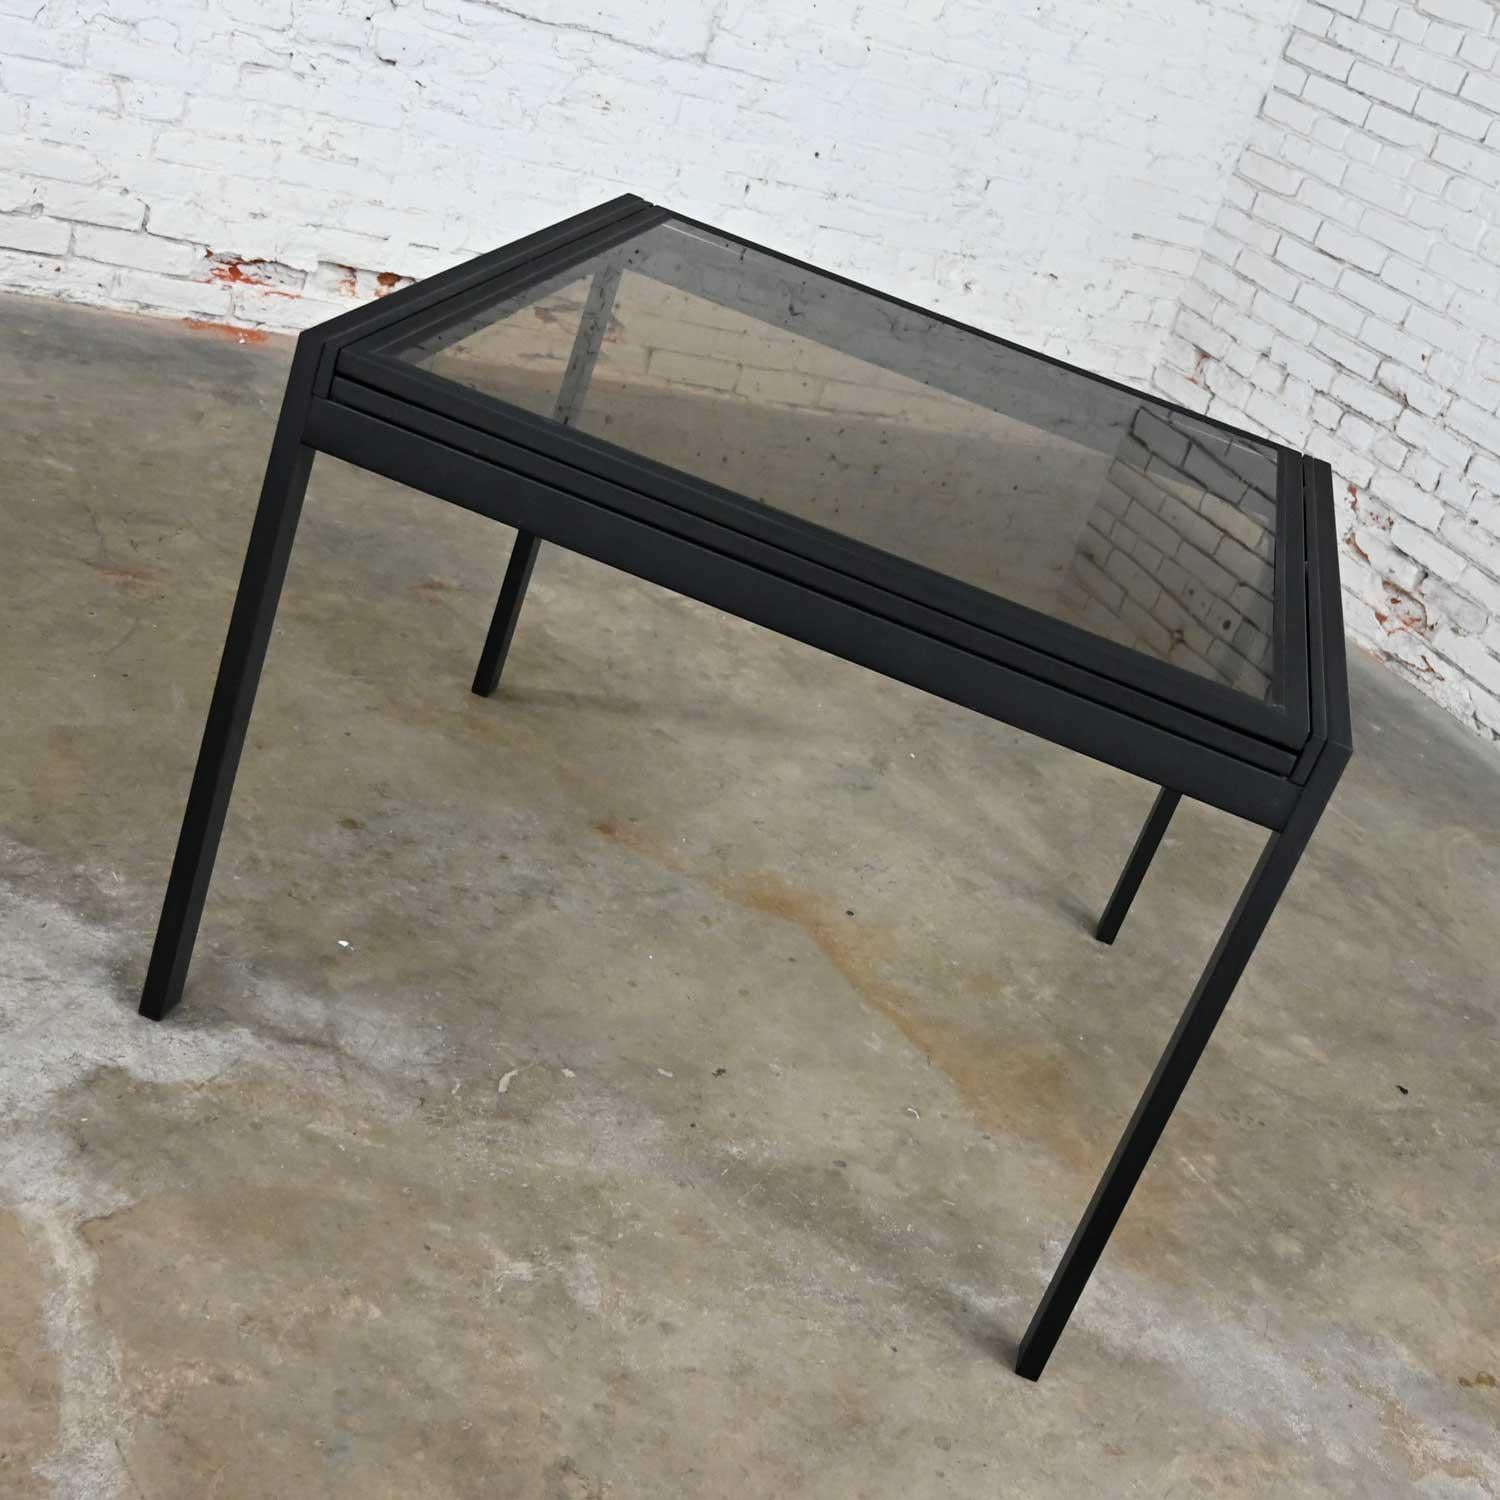 MCM Black Powder Coated Metal Smoked Glass Square Expanding Table Attr DIA In Good Condition For Sale In Topeka, KS